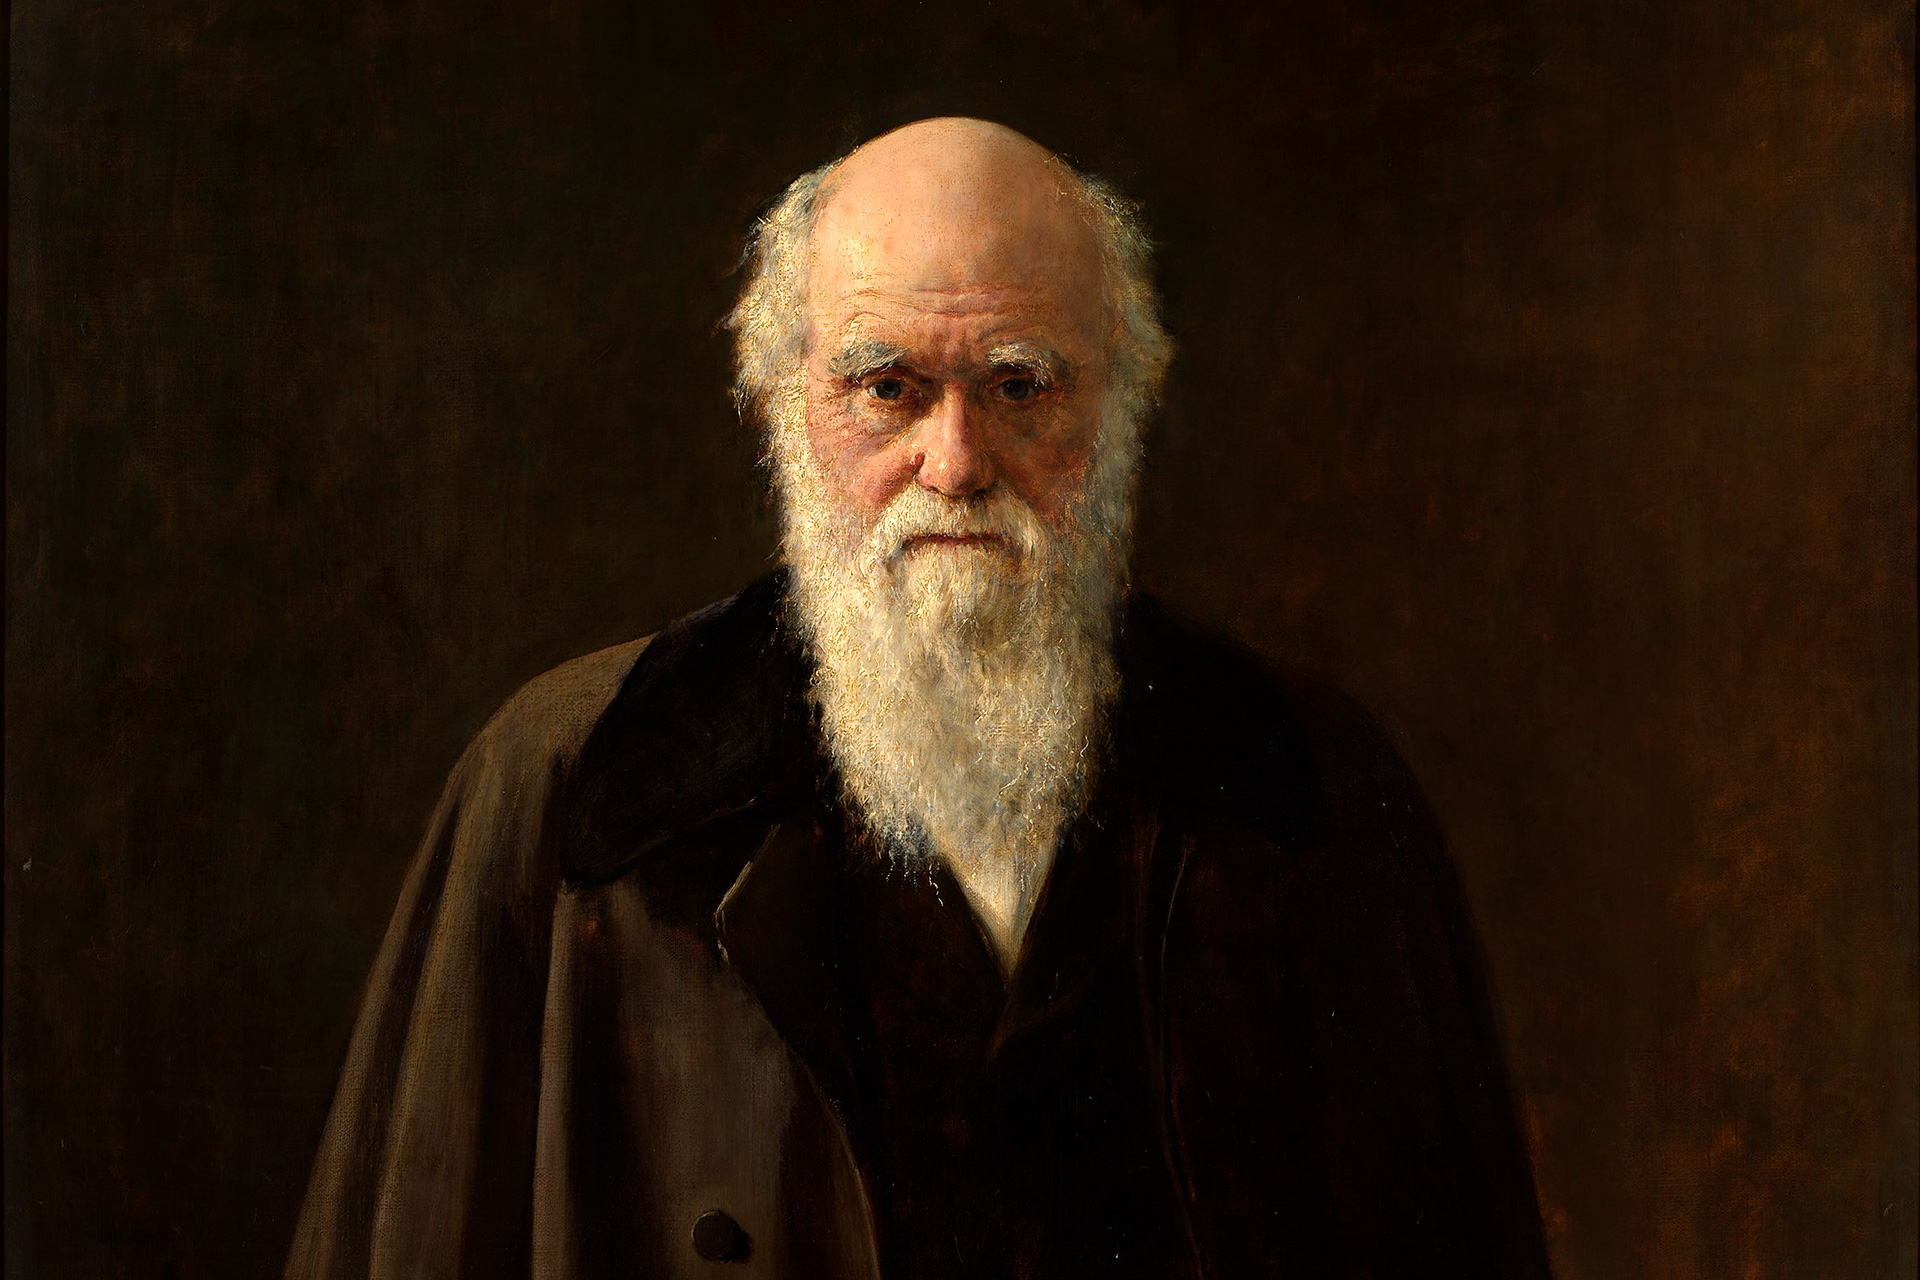 Charles Darwin's full correspondence is now available online